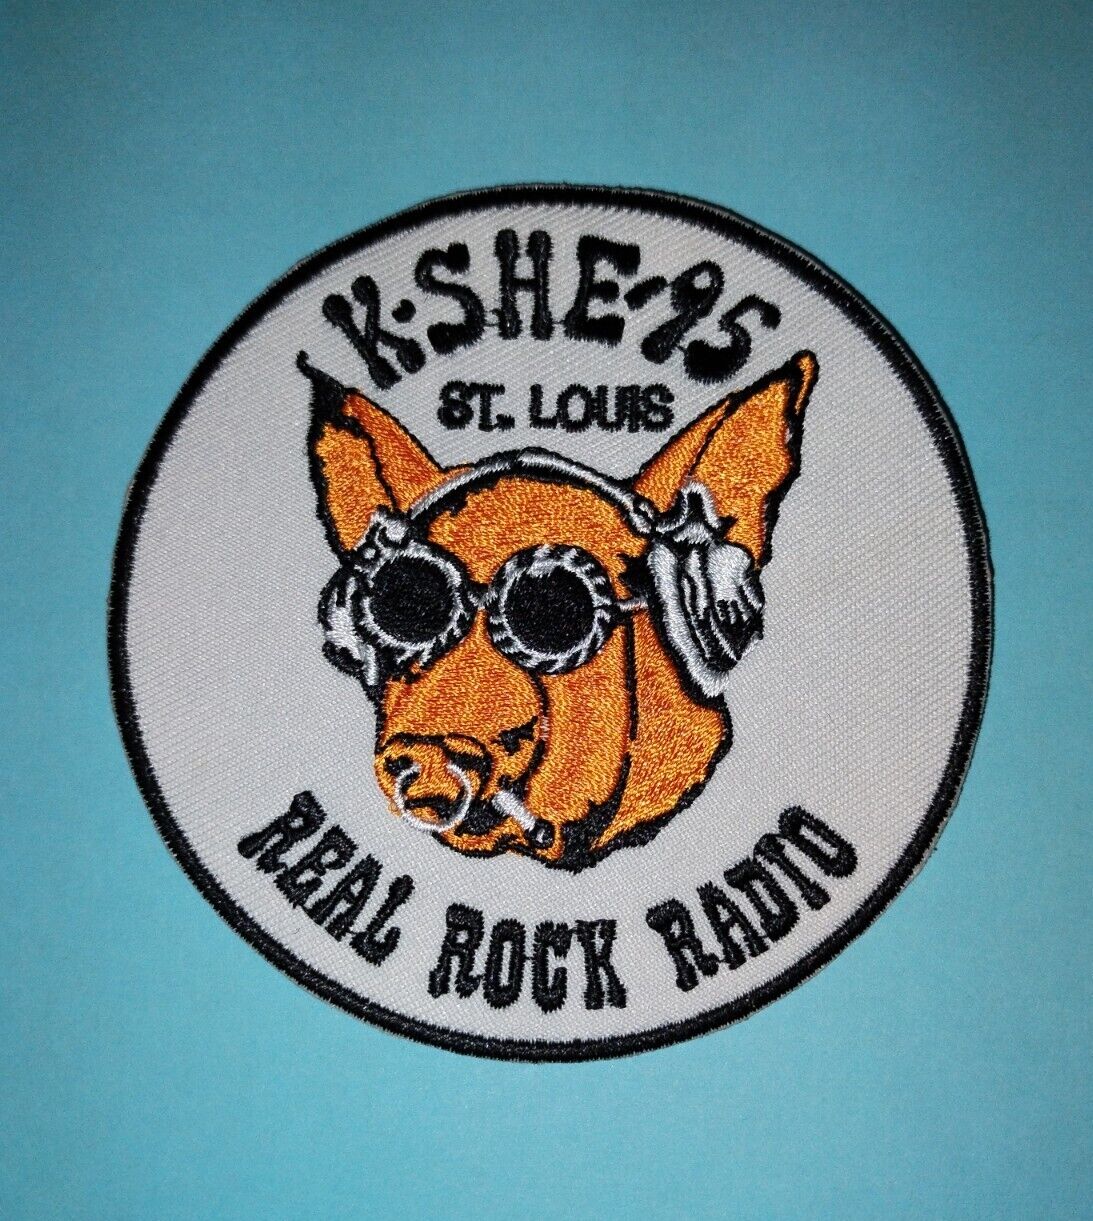 KSHE 95 Real Rock Radio PATCH - Embroidered Sew Iron k-she St. Louis